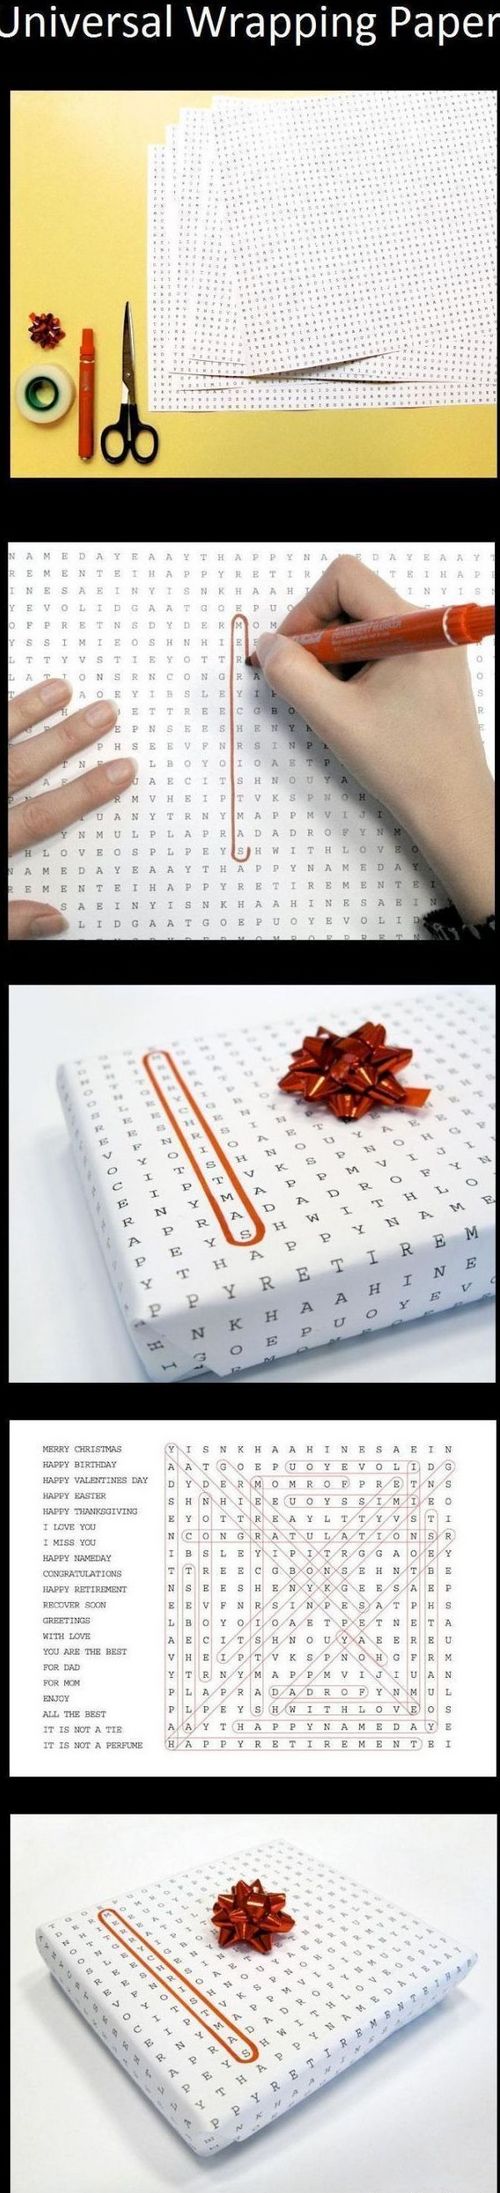 Funny Picture - Universal Wrapping Paper